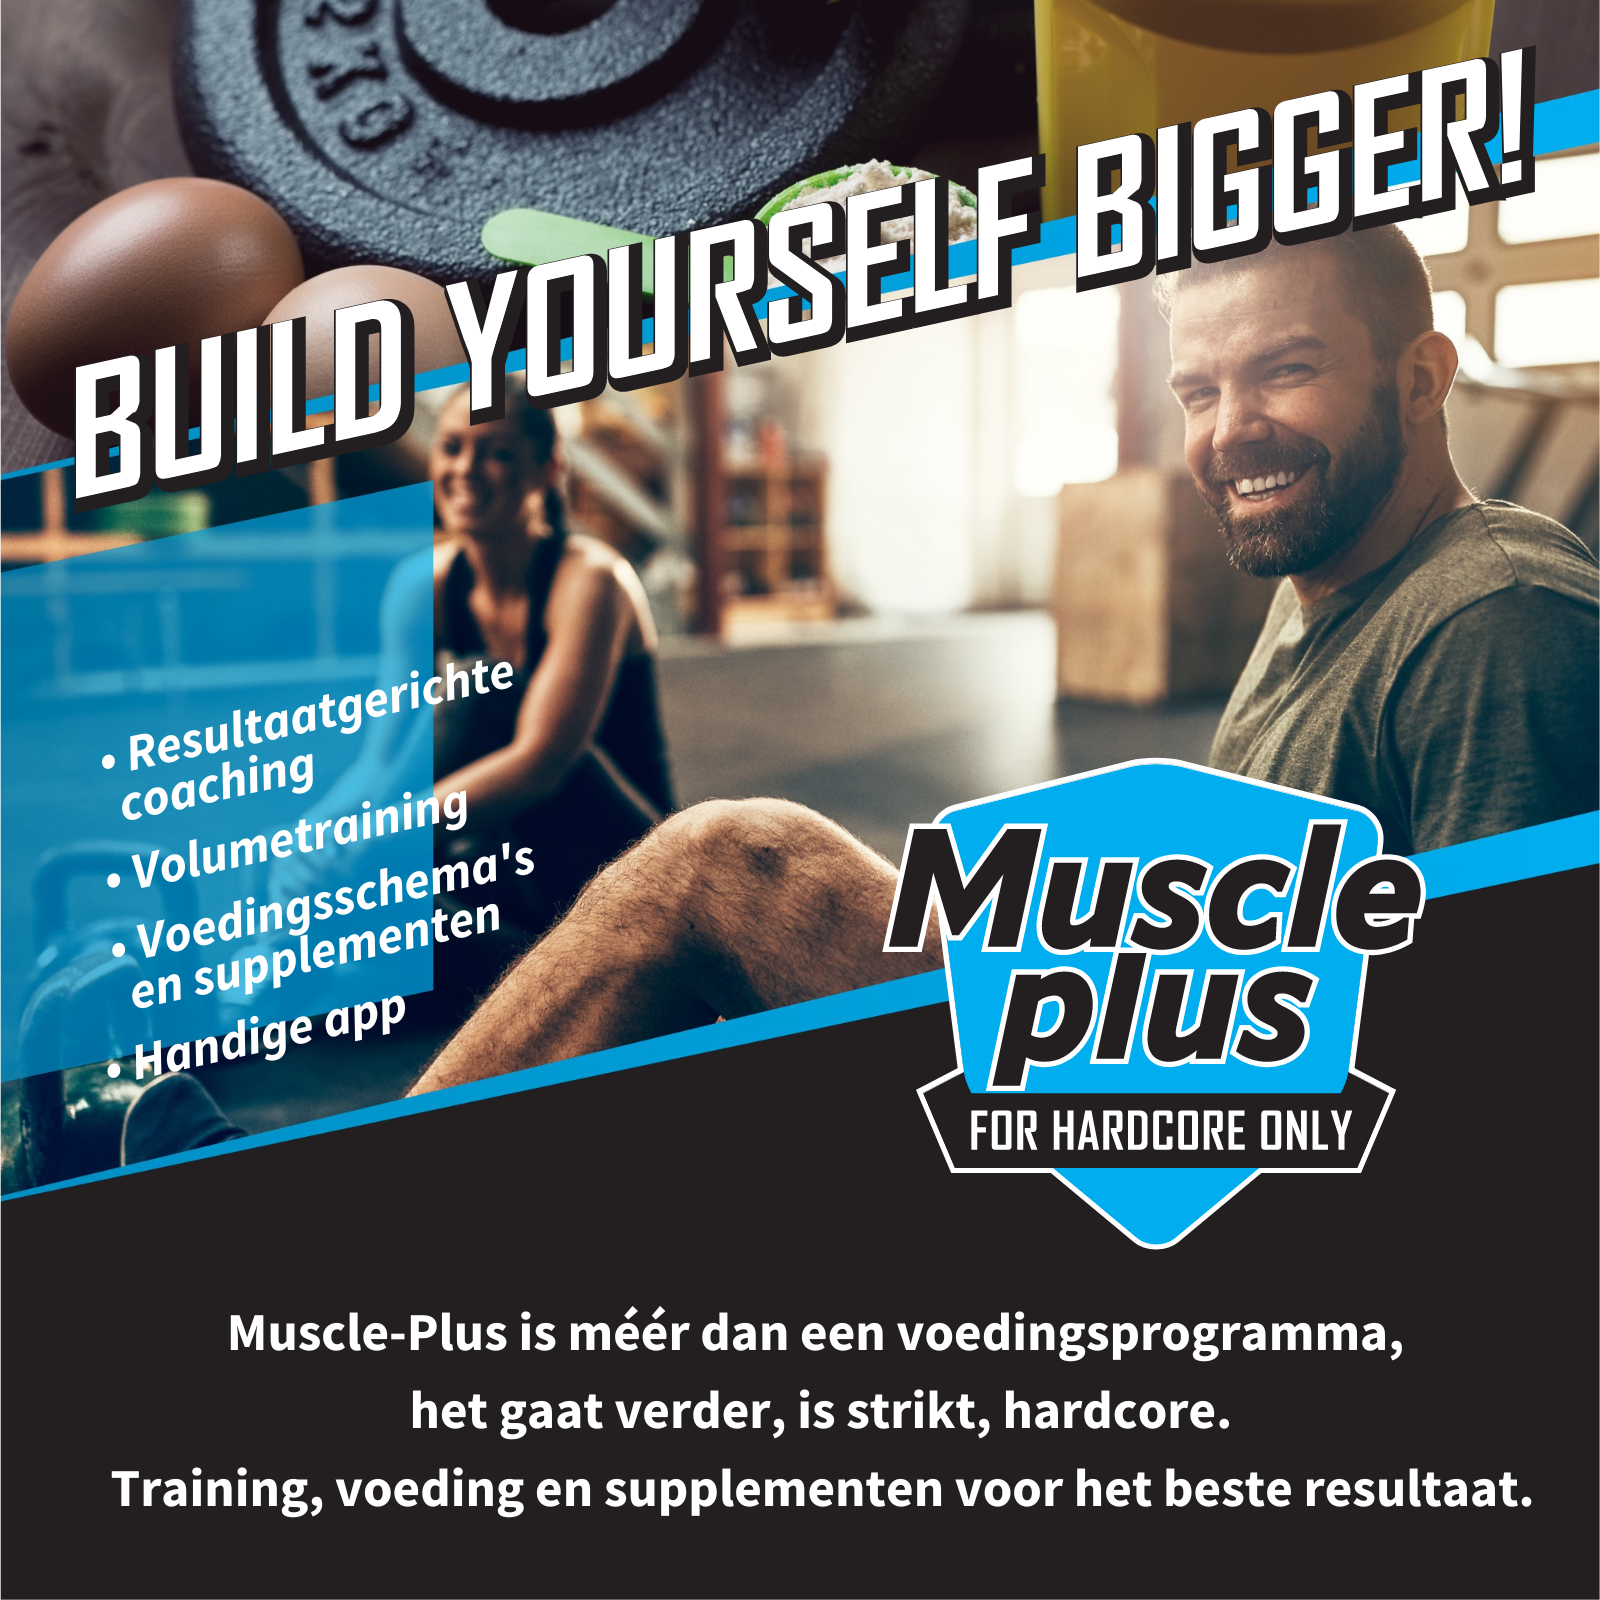 Muscle Plus marketing campagne